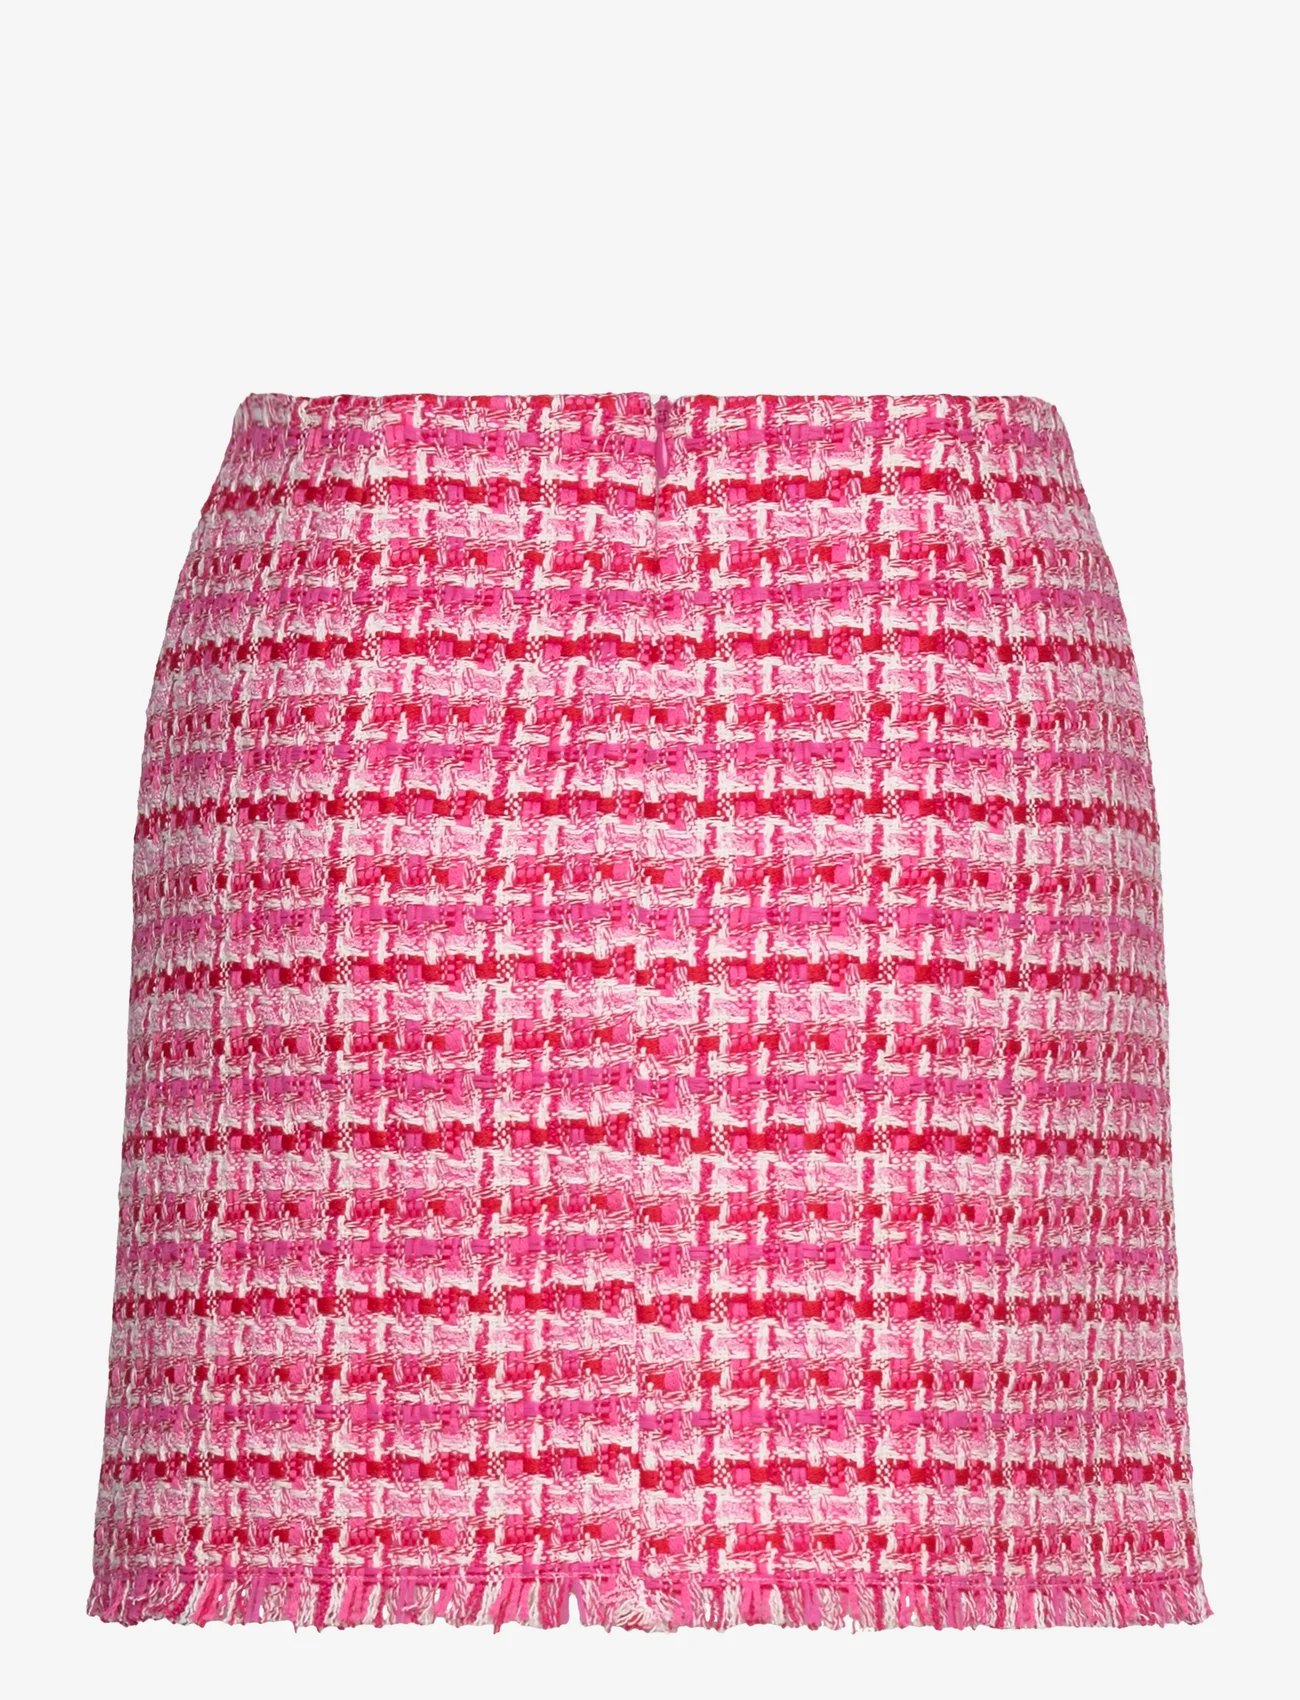 Karl Lagerfeld - boucle skirt - short skirts - pink/red boucle - 1